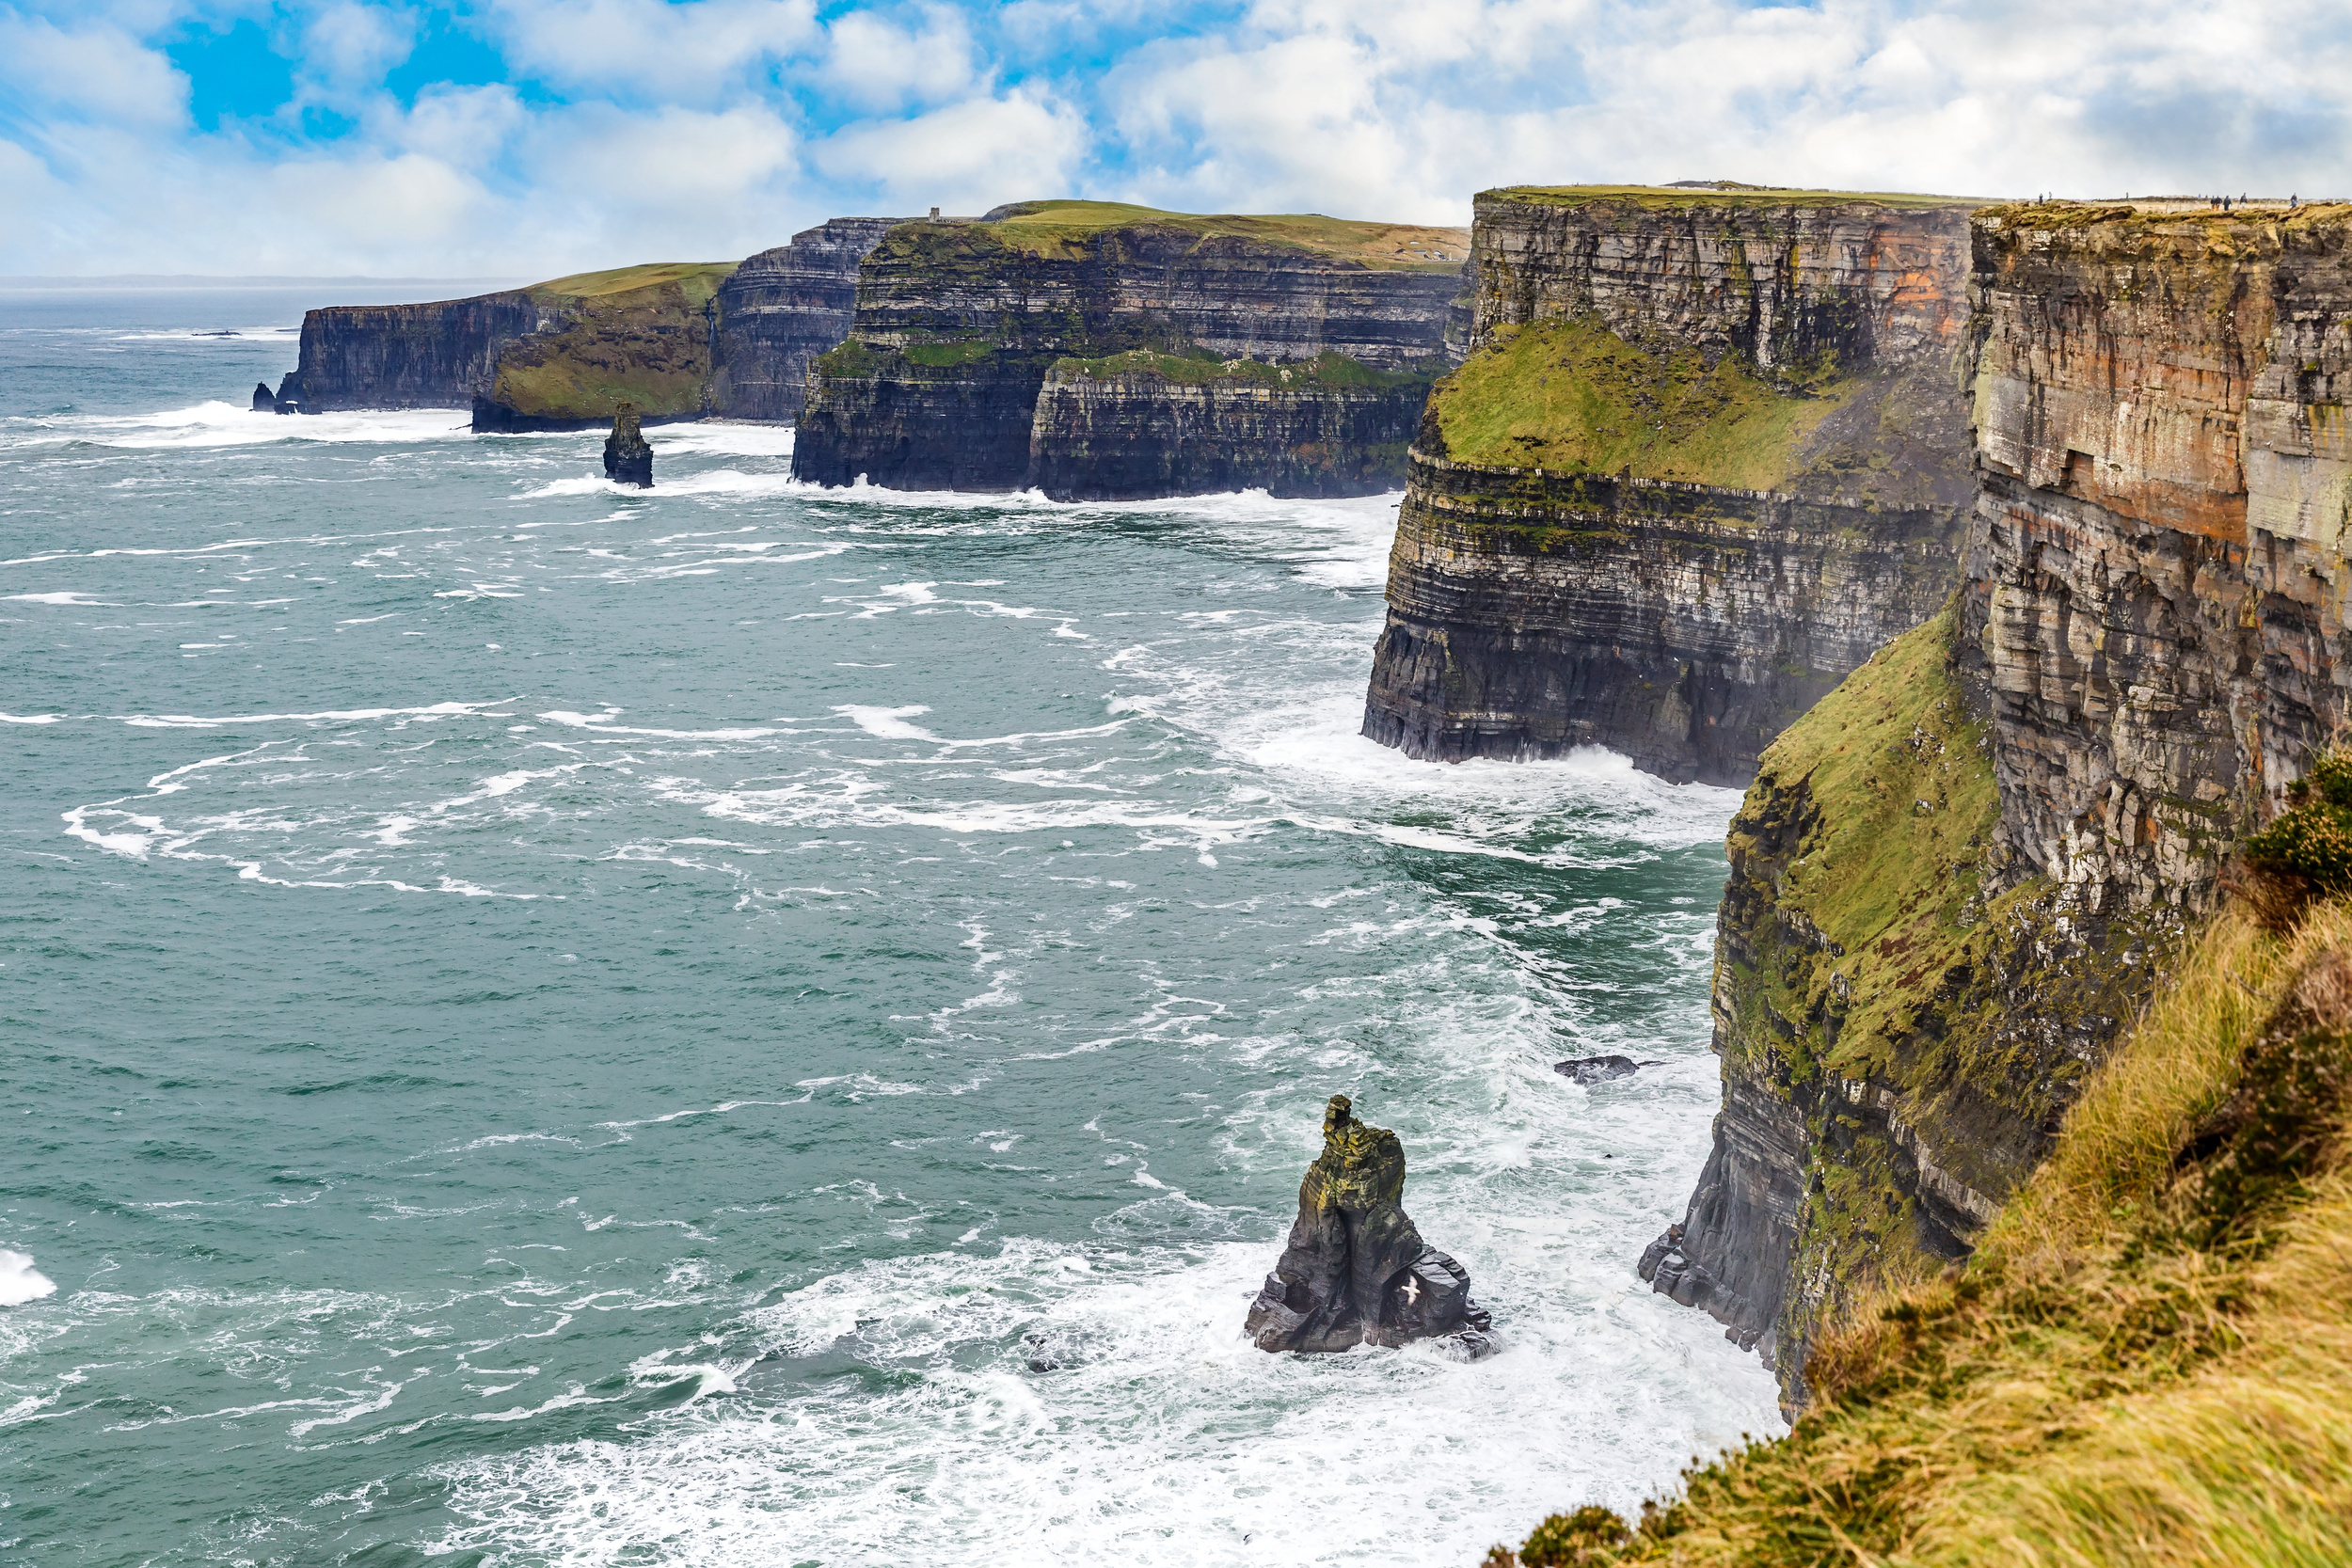 <p>Admittedly a bit far as a day trip from Dublin, but if you can swing it, you won’t regret the decision. The straight-down bright green cliffs are a great viewpoint for Galway Bay and the Aran Islands. You’ll get plenty of exercise on the walk to make the long drive worth it!</p><p>You may also like: <a href='https://www.yardbarker.com/lifestyle/articles/23_things_you_didnt_know_about_pizza_hut_031524/s1__39859726'>23 things you didn’t know about Pizza Hut</a></p>